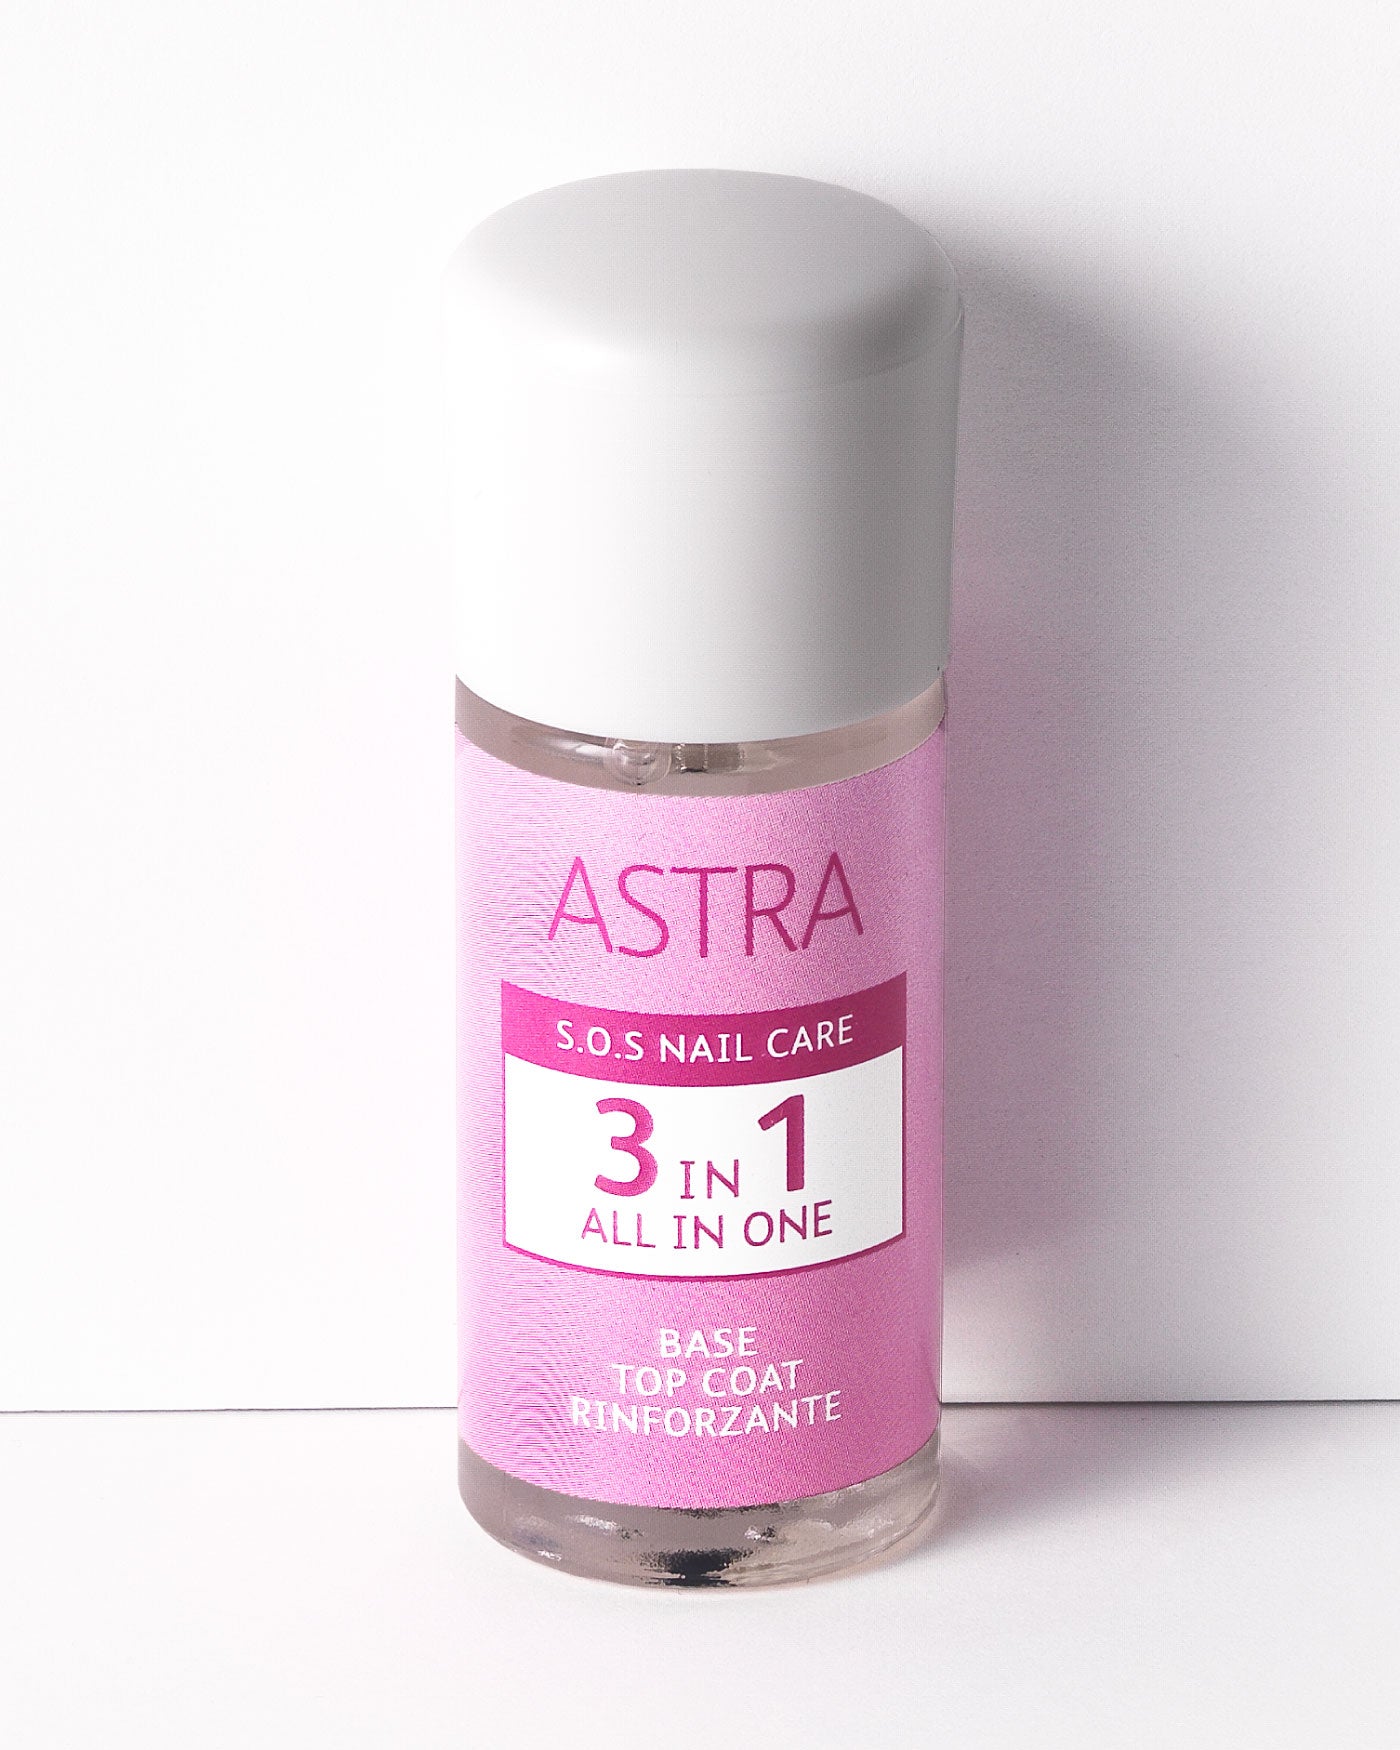 S.O.S NAIL CARE - 3 IN 1 ALL IN ONE - All Products - Astra Make-Up